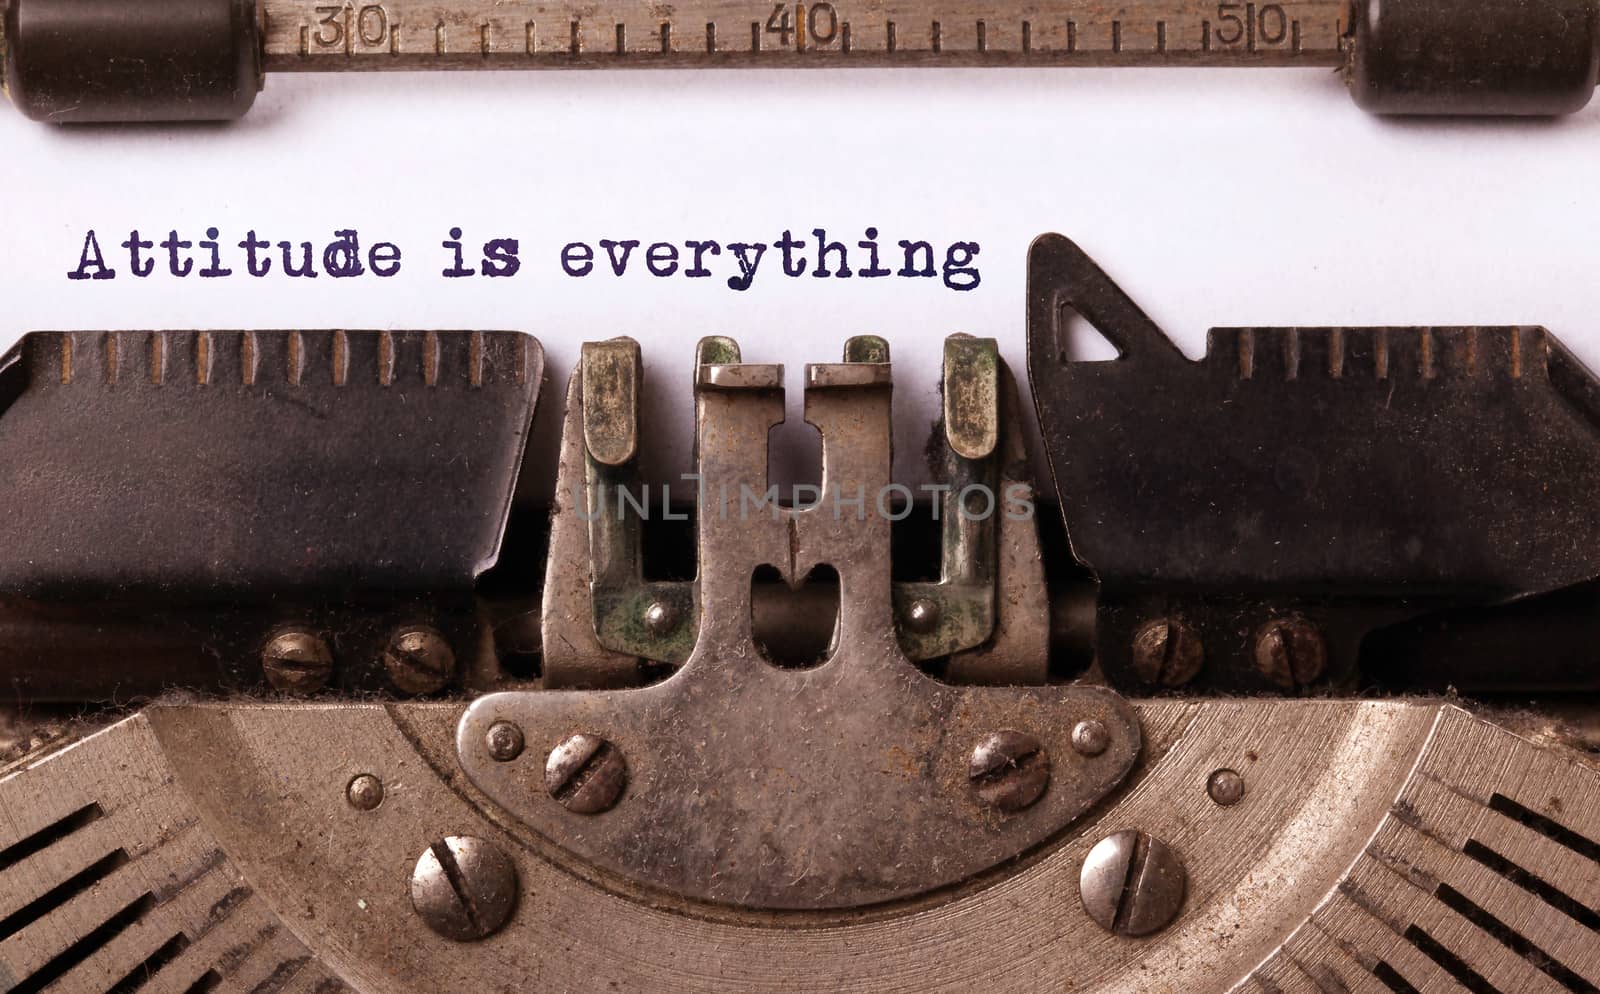 Vintage inscription made by old typewriter, attitude is everything